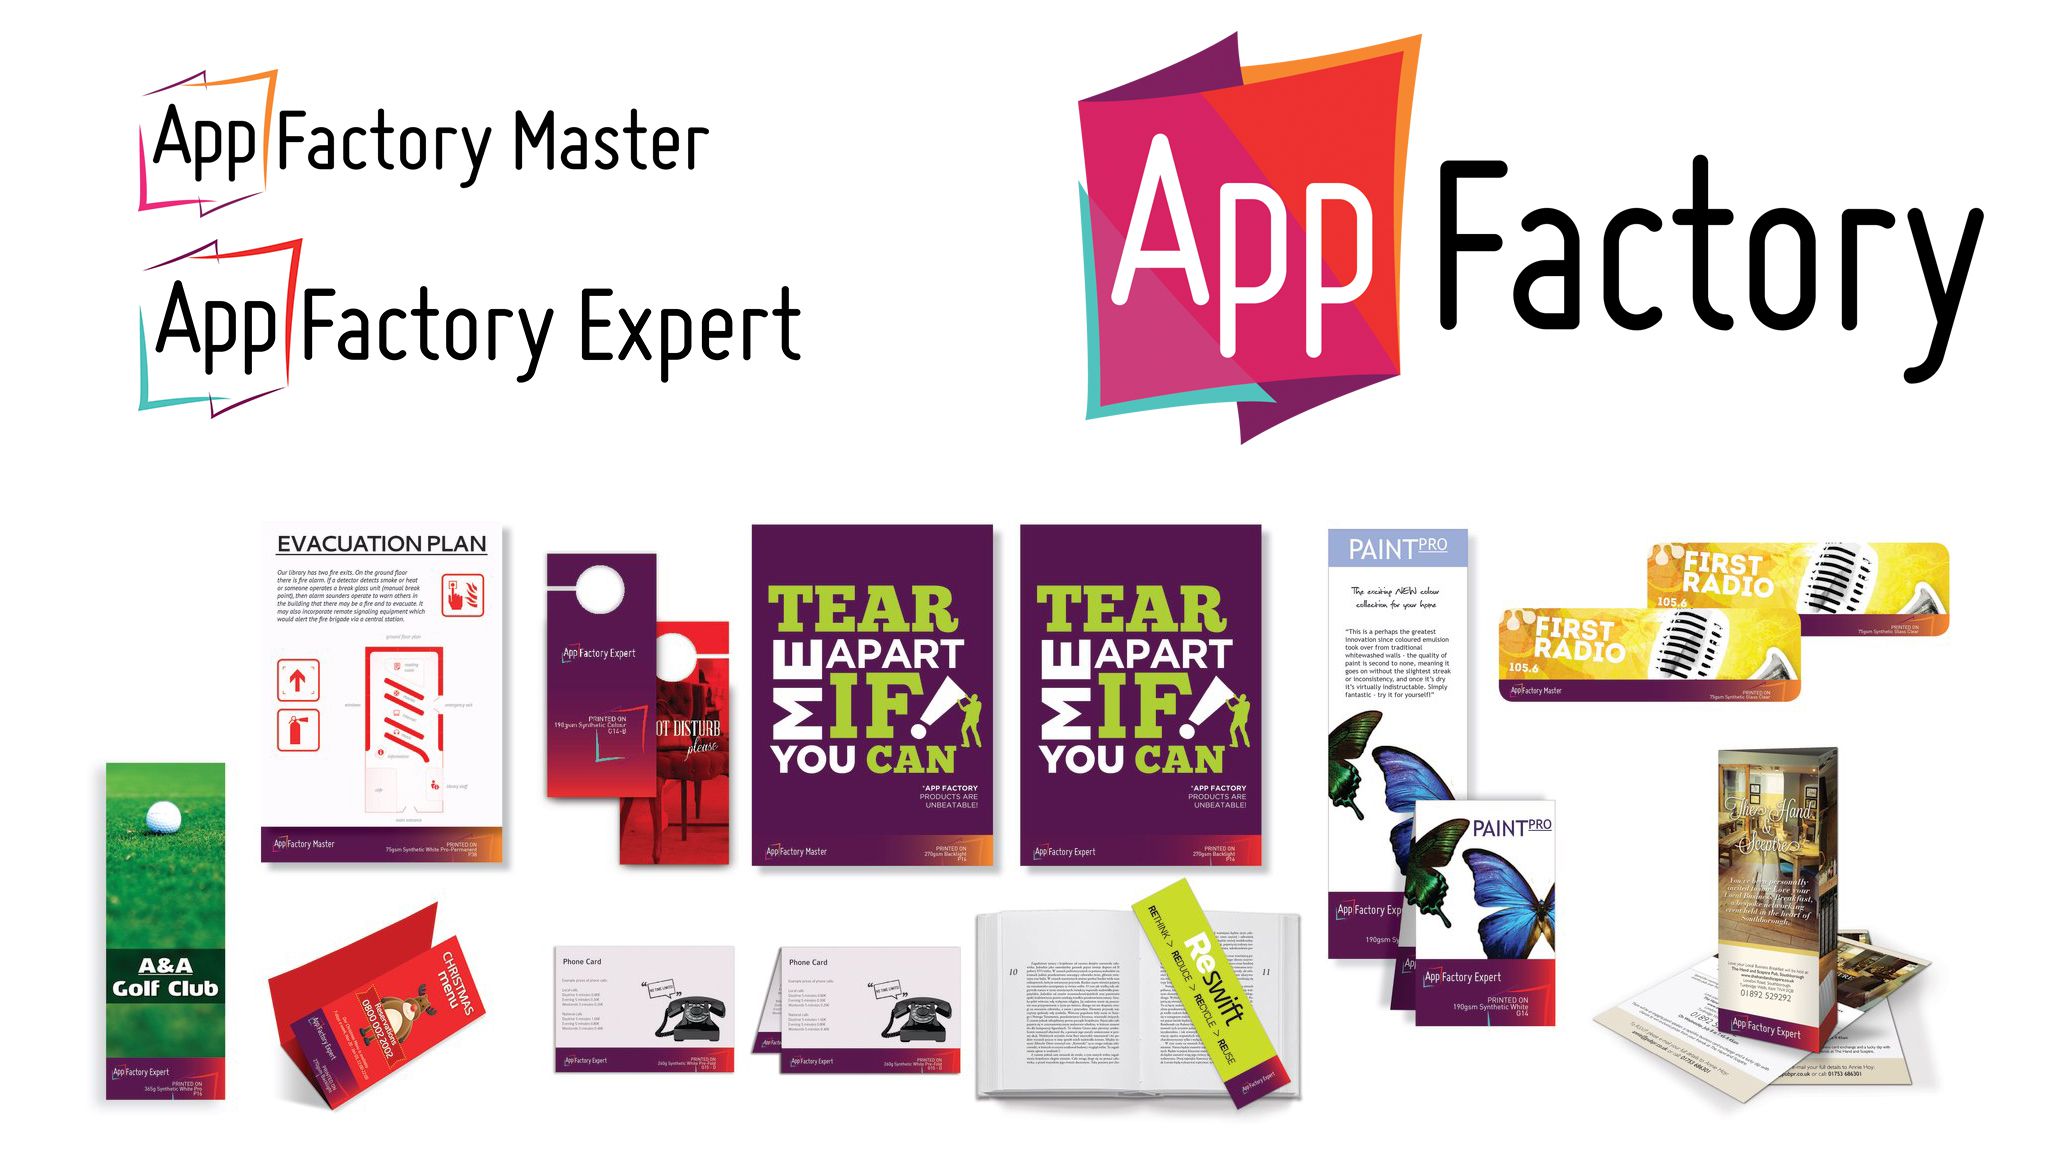 AppFactory Hadron for Business